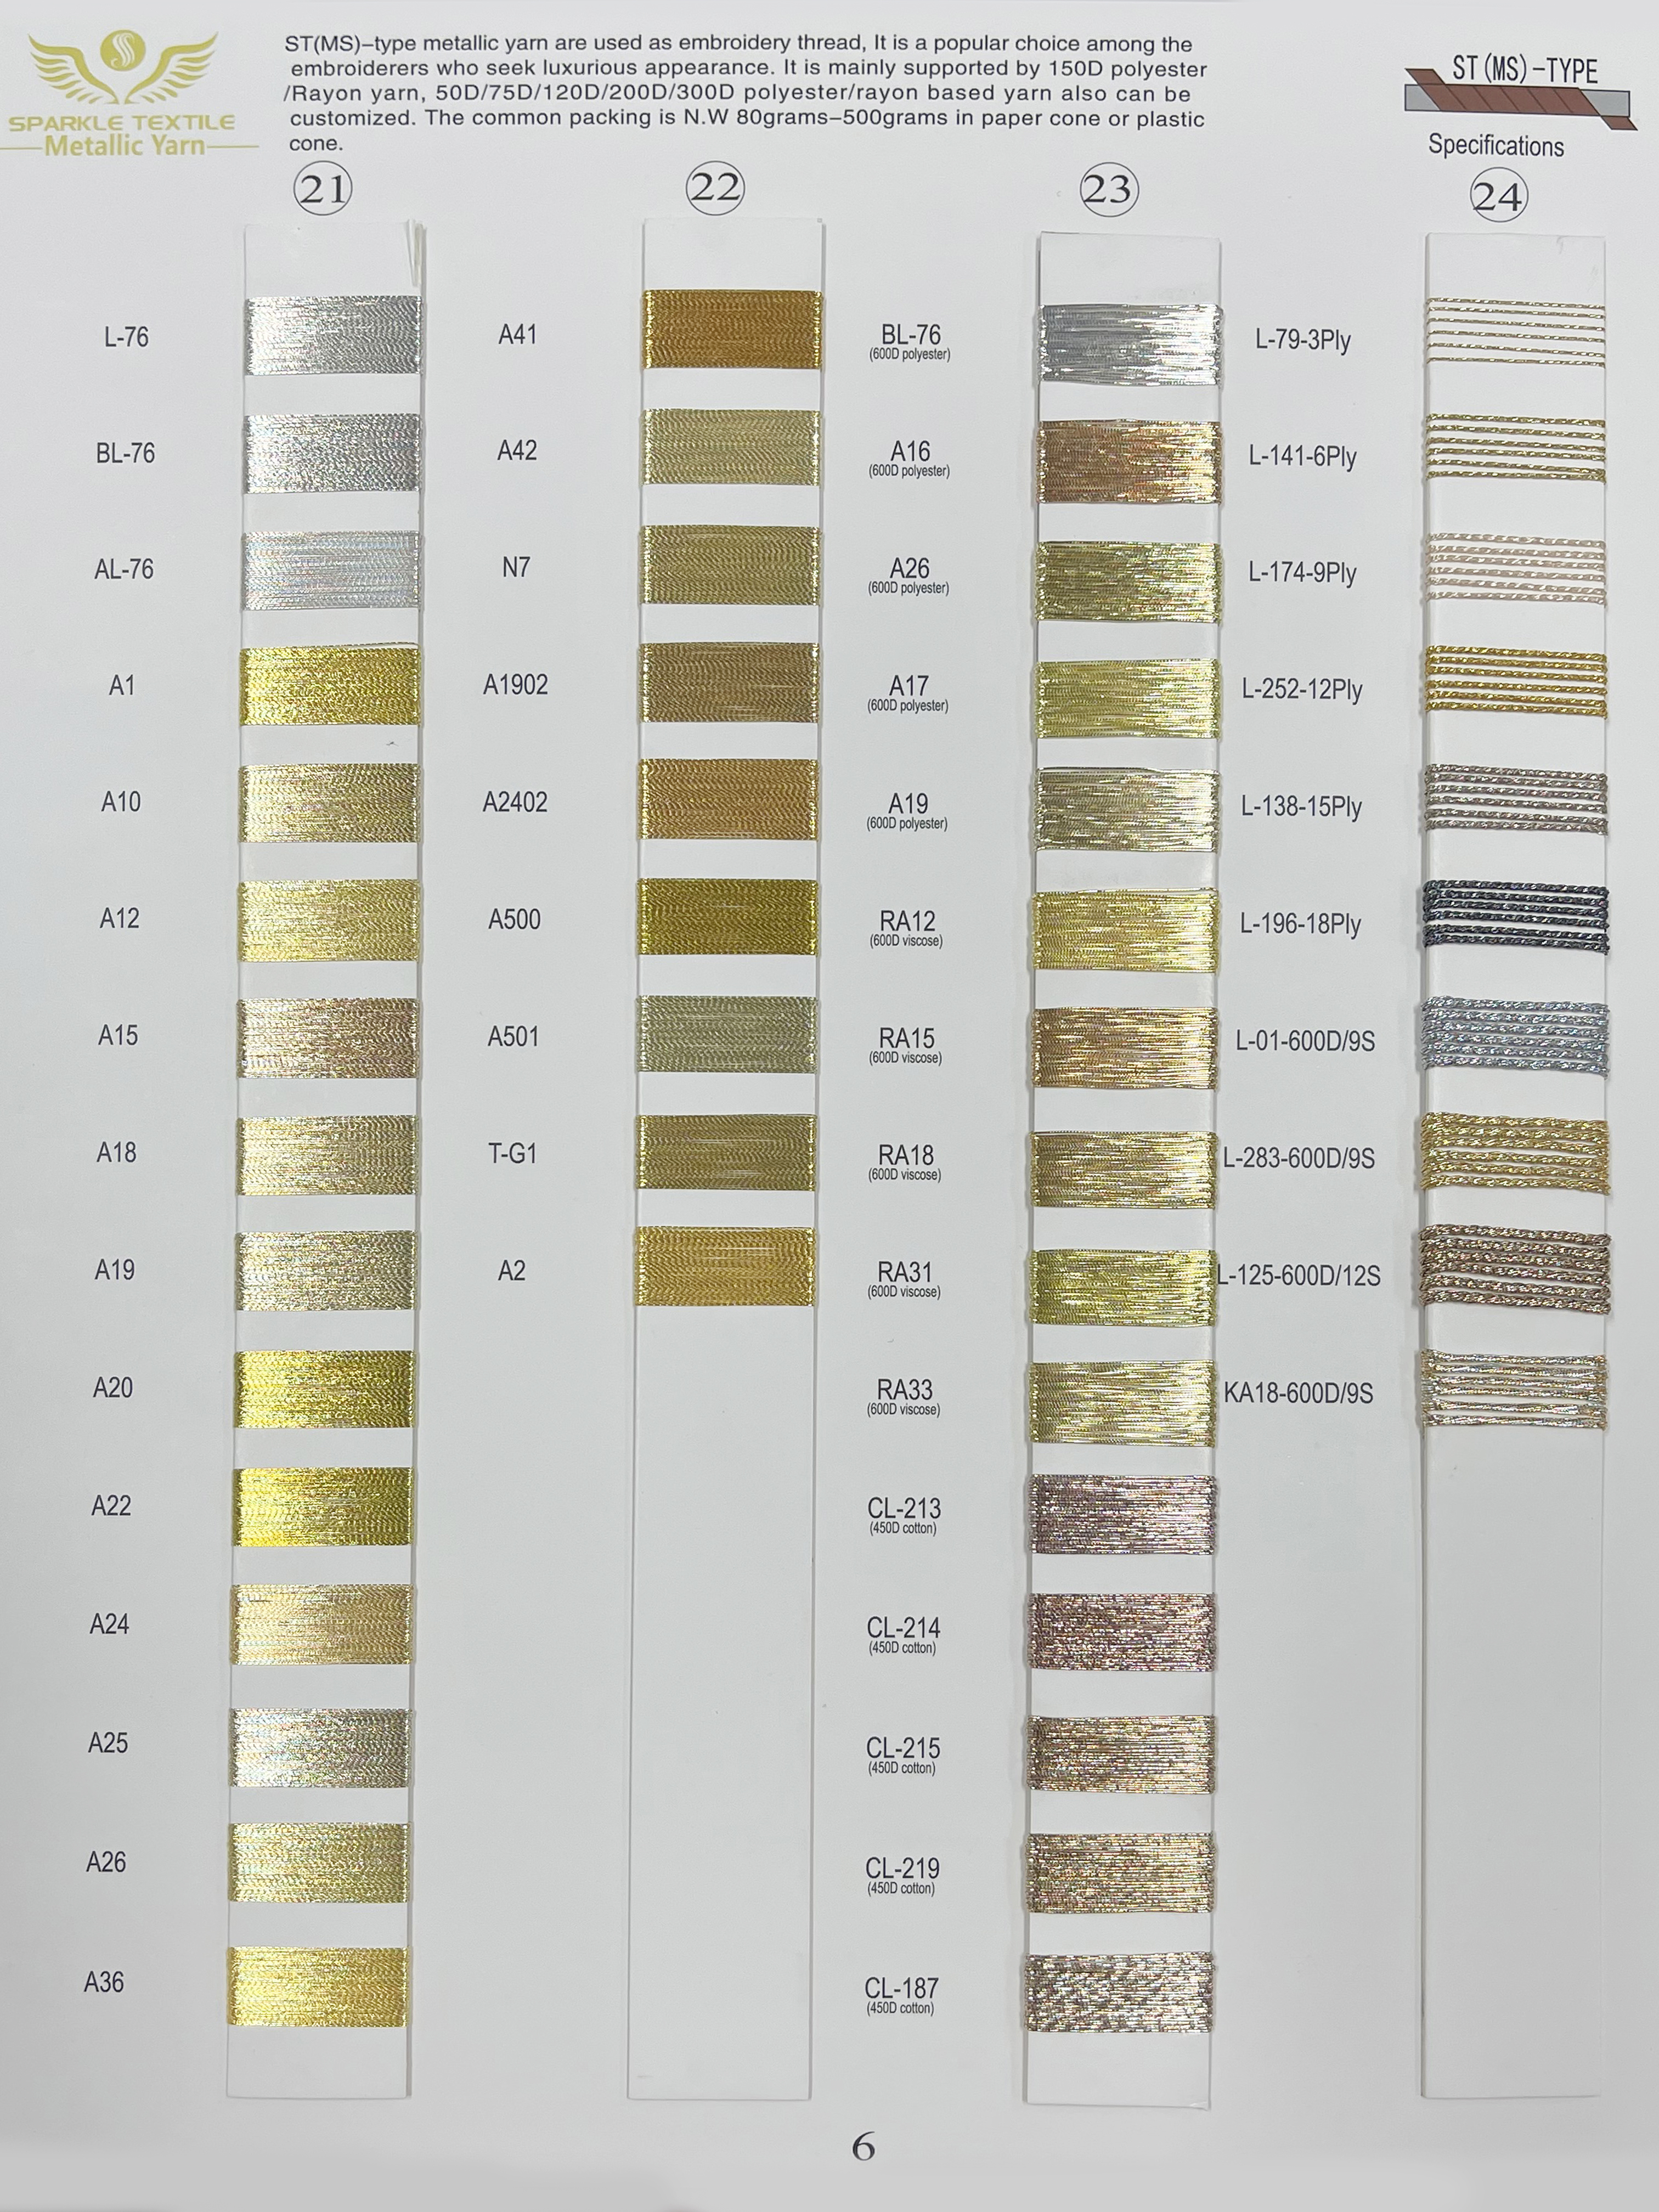 For Dubai Market First Grade Quality S-47 S-48 S-52 S-54 Pure Gold Pure Silver MS-Type Metallic Yarn Embroidery Threads